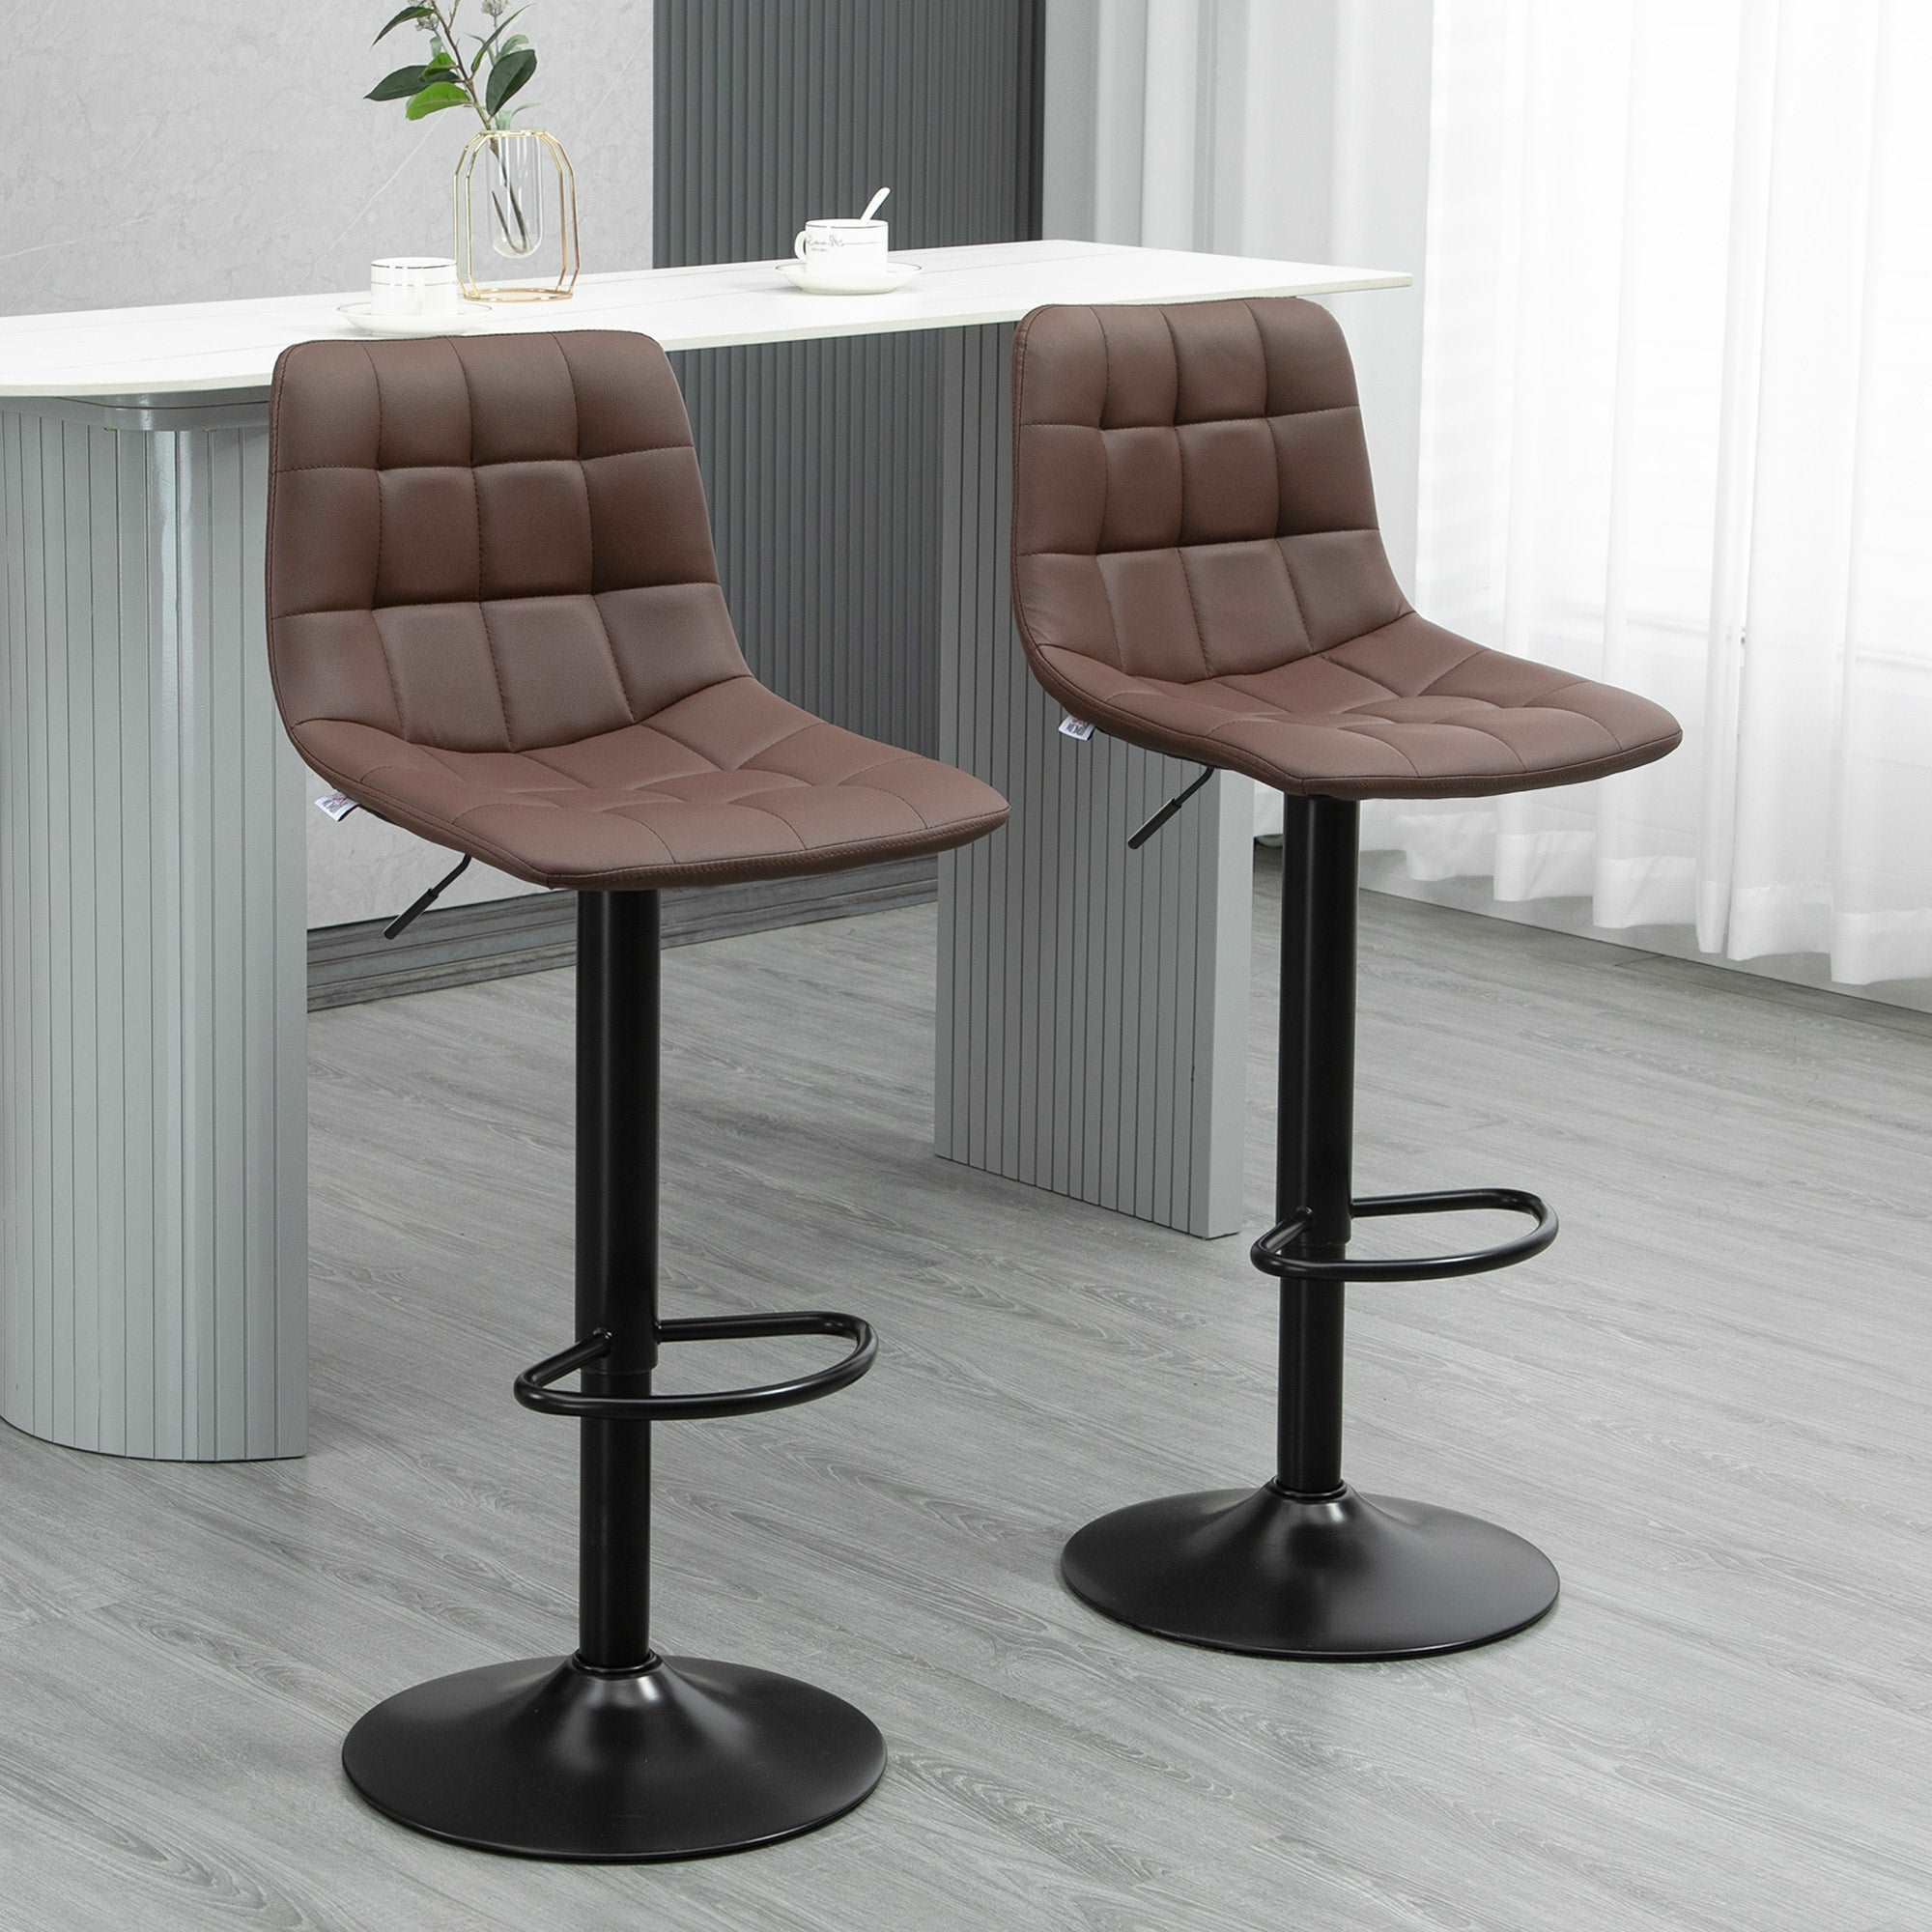 Adjustable Bar Stools Set of 2, Counter Height Barstools Dining Chairs 360Â° Swivel with Footrest for Home Pub and Kitchen, Brown  AOSOM   